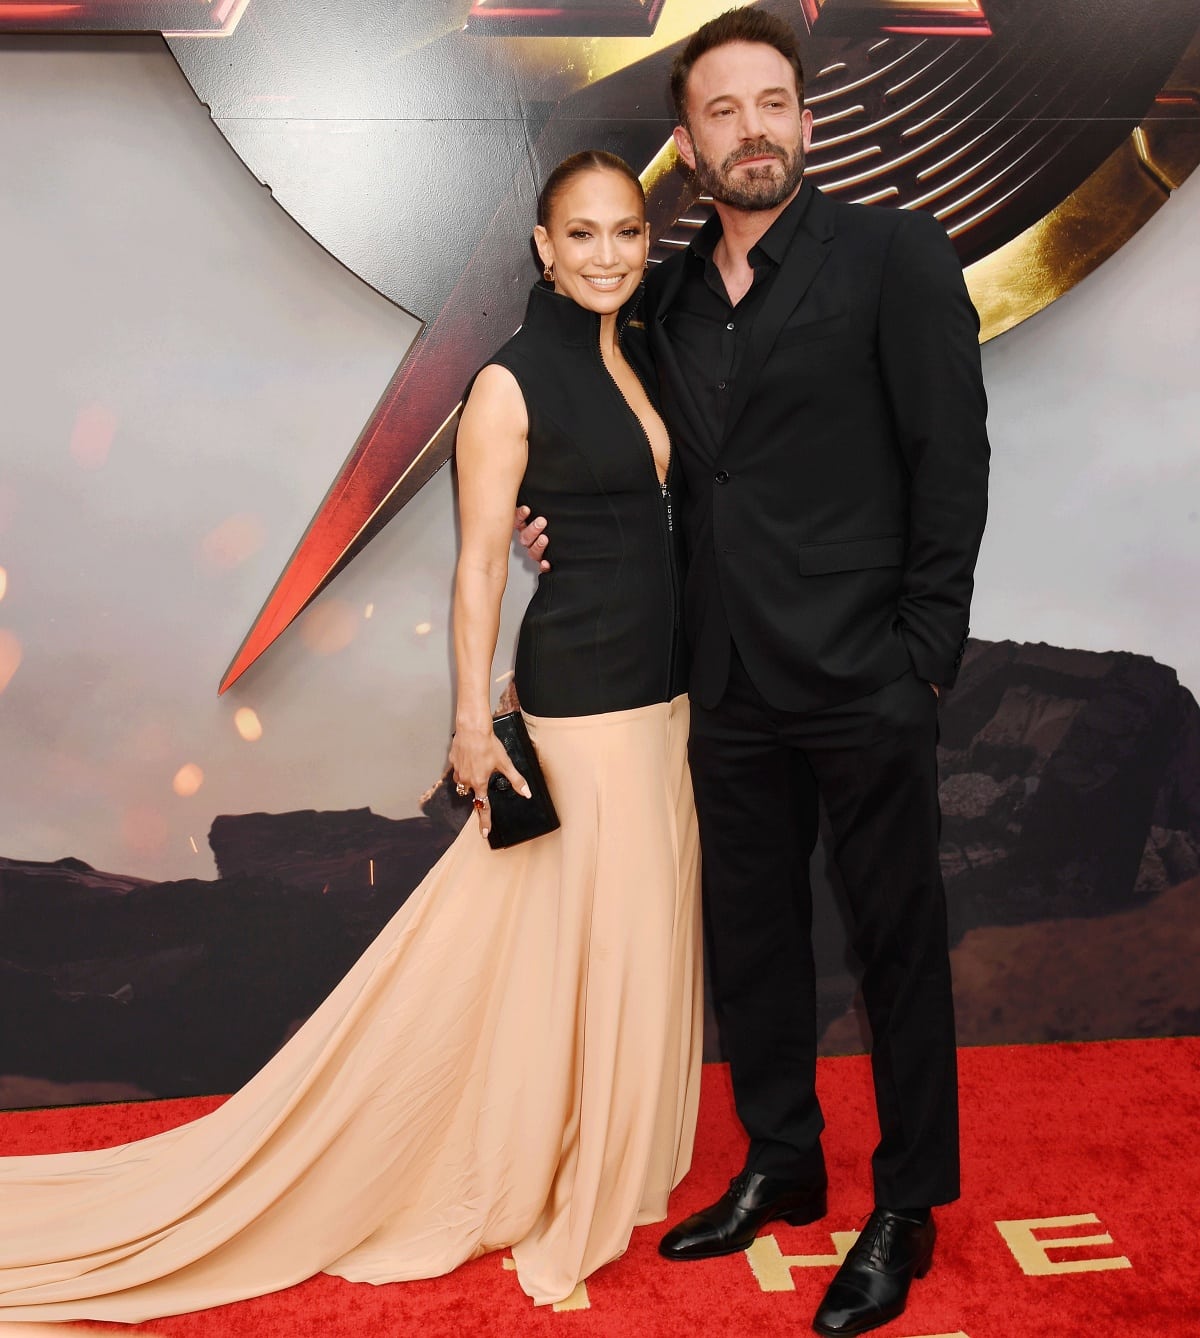 Jennifer Lopez and Ben Affleck lent their star power at the premiere of The Flash